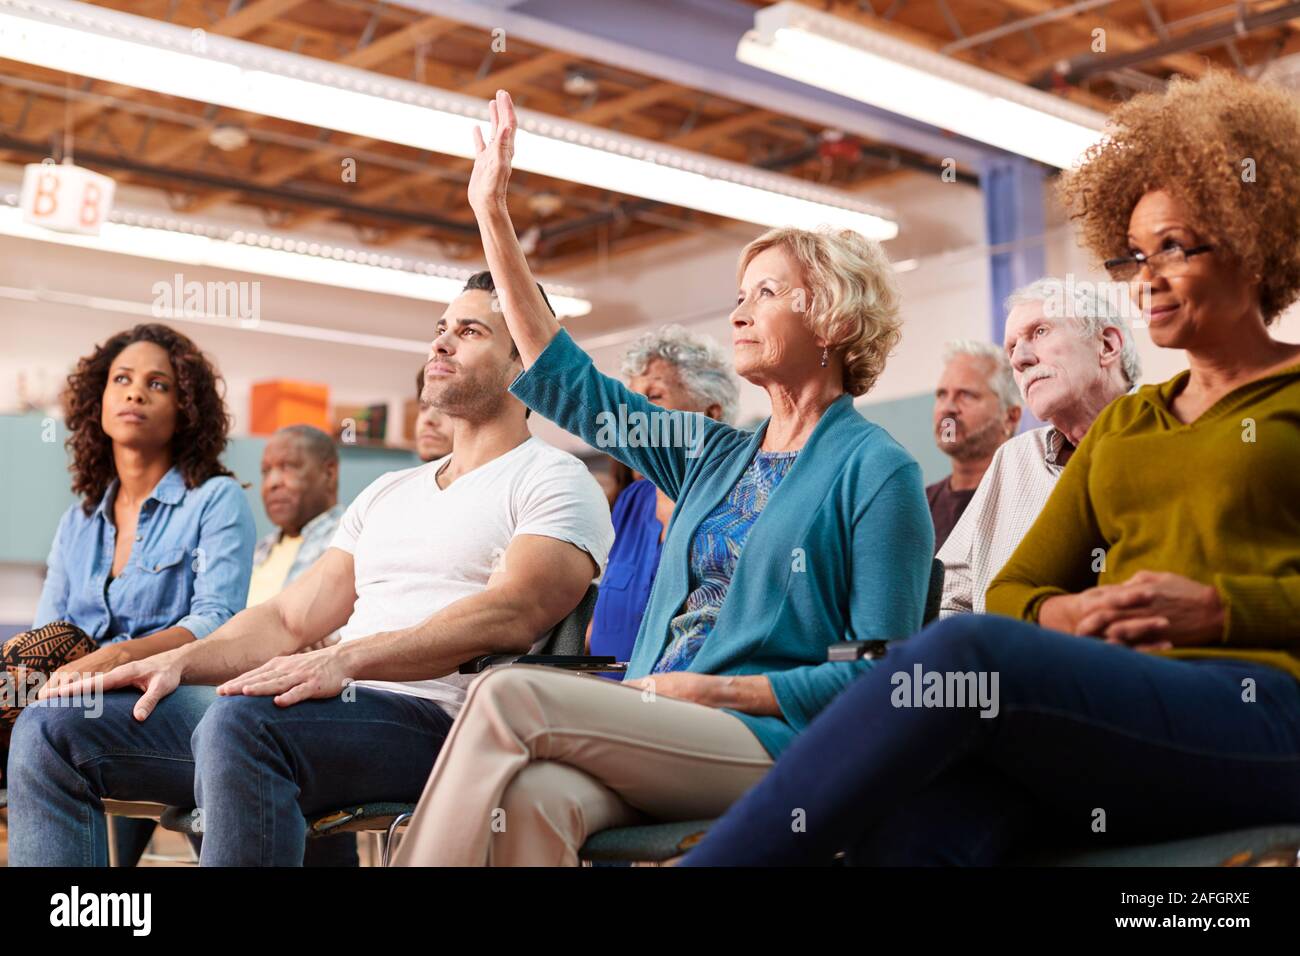 Woman Asking Question At Neighborhood Meeting In Community Center Stock Photo